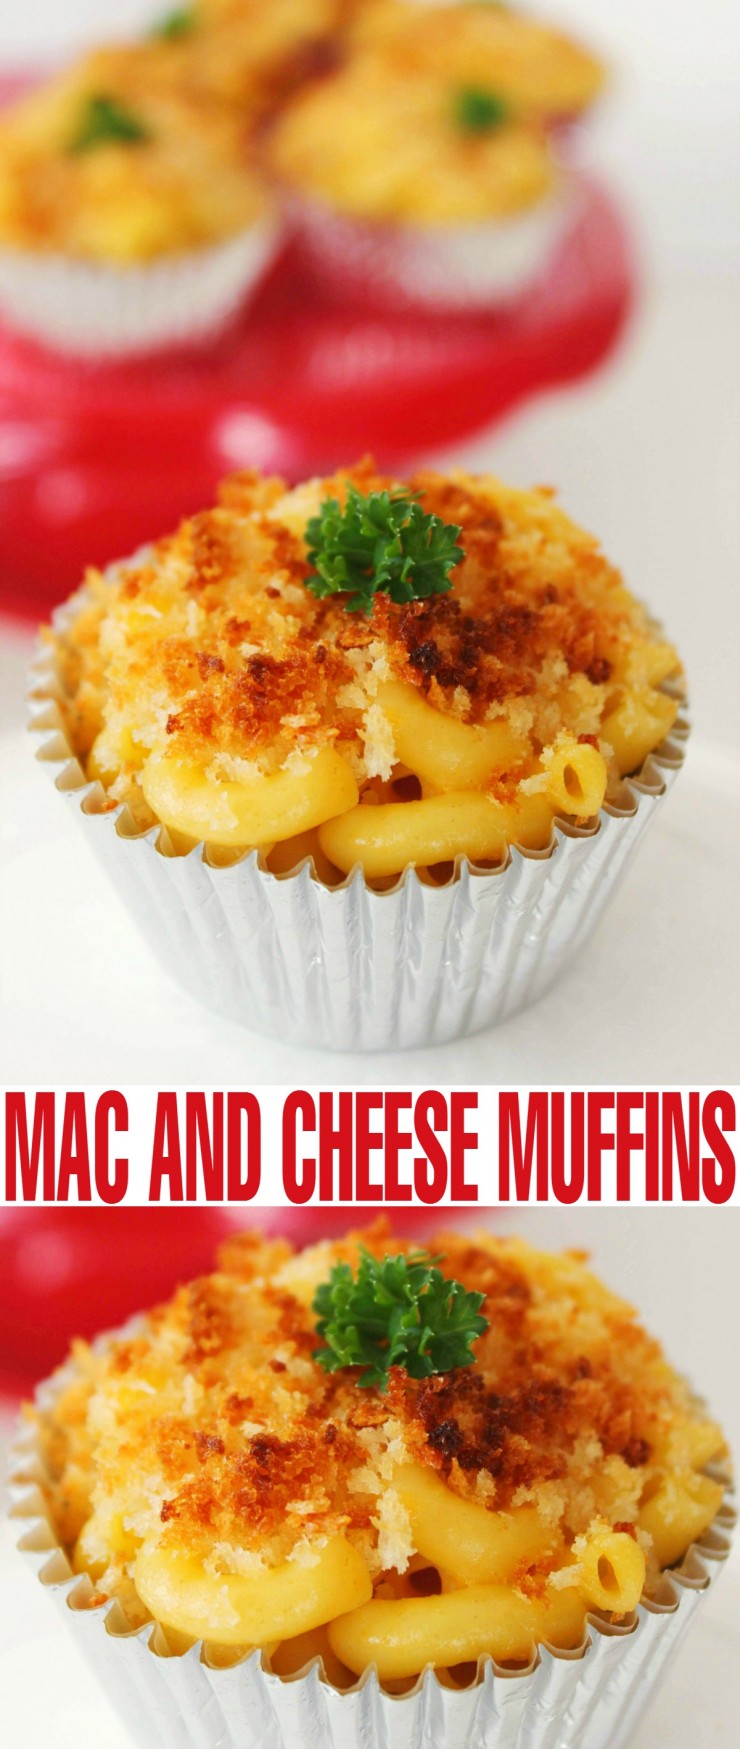 Basically every kid loves Mac & cheese, and these Mac & Cheese muffins are a fun twist on the classic macaroni and cheese recipe to make an even more kid friendly meal. 